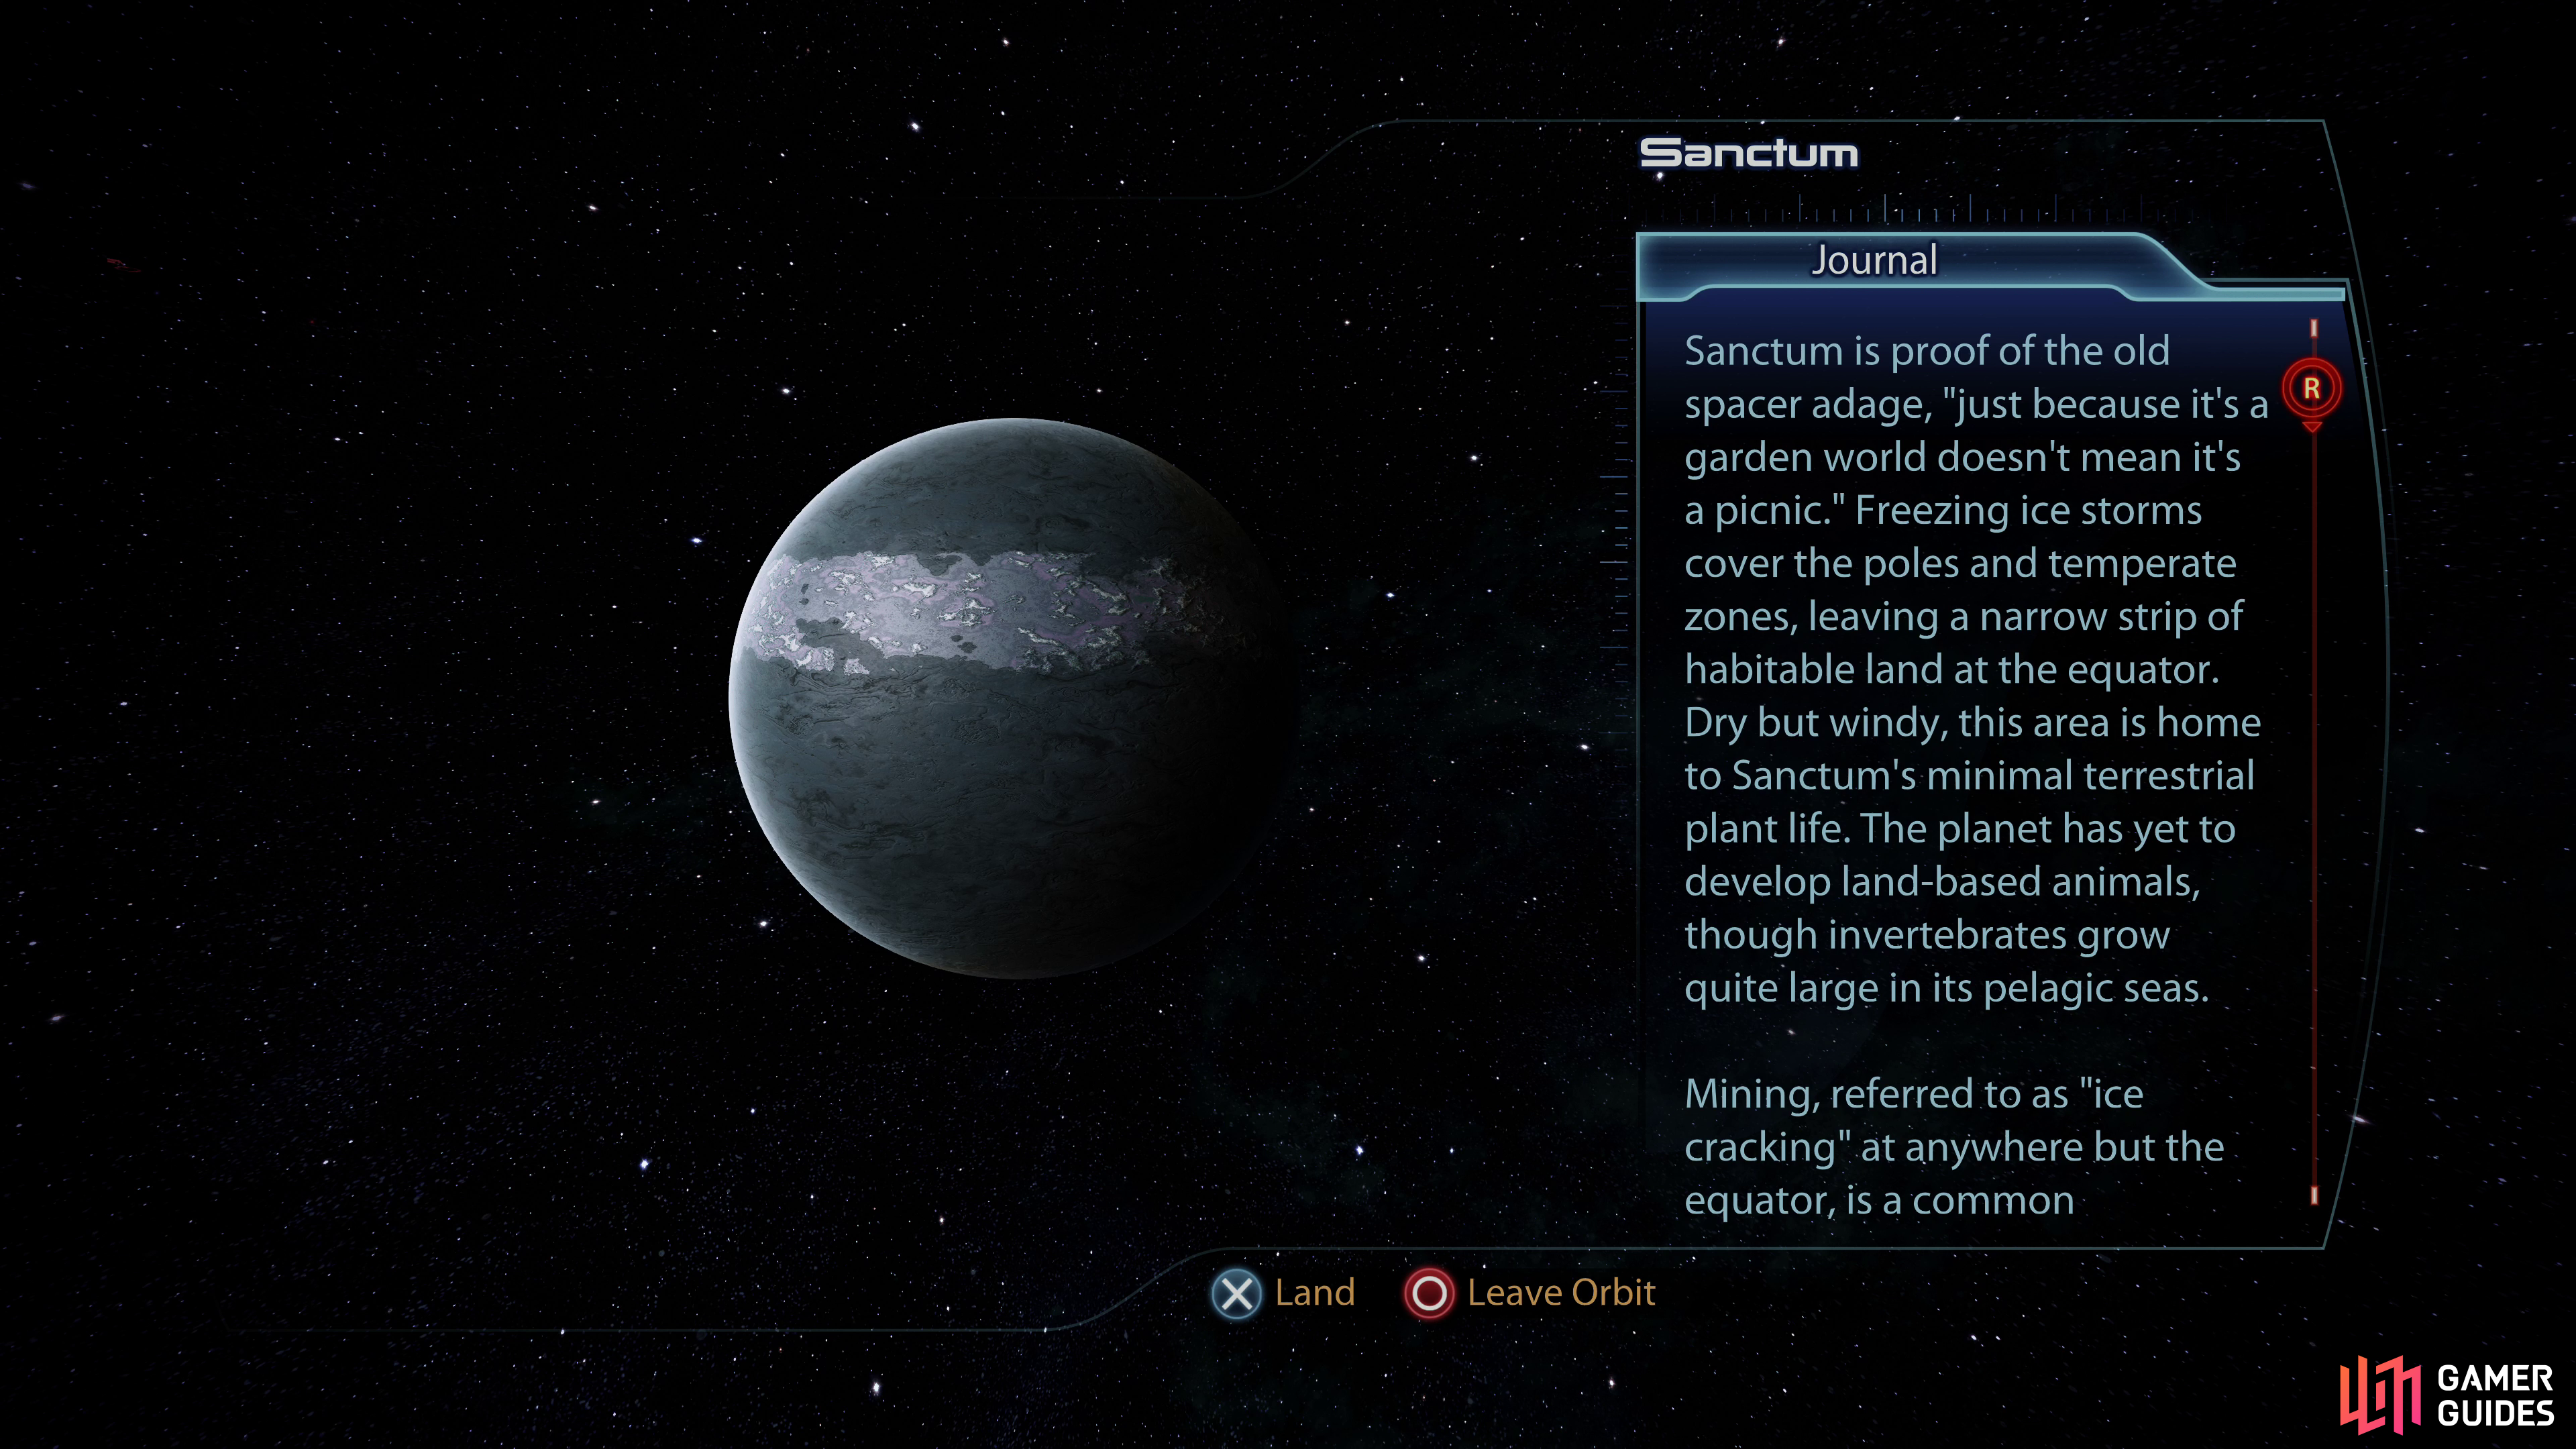 The mission "N7: Cerberus Lab" can be started by traveling to the planet Sanctum.